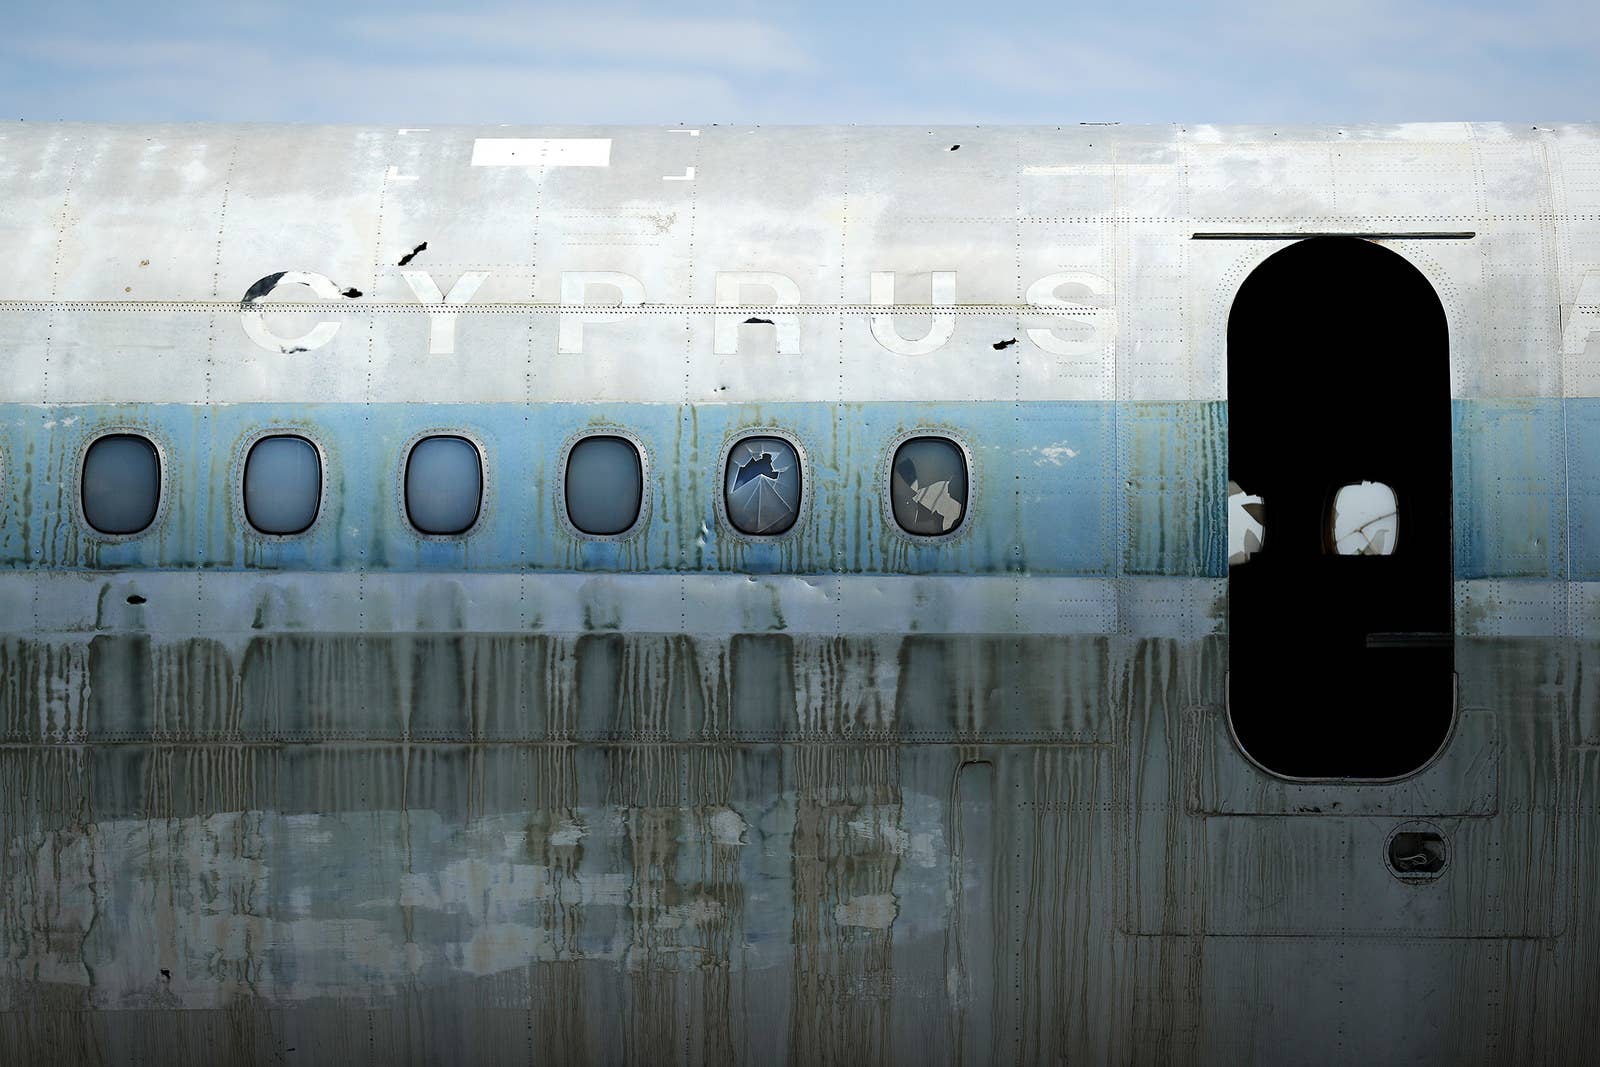 A abandoned and decaying Cyprus Airways passenger plane sits on the runway.